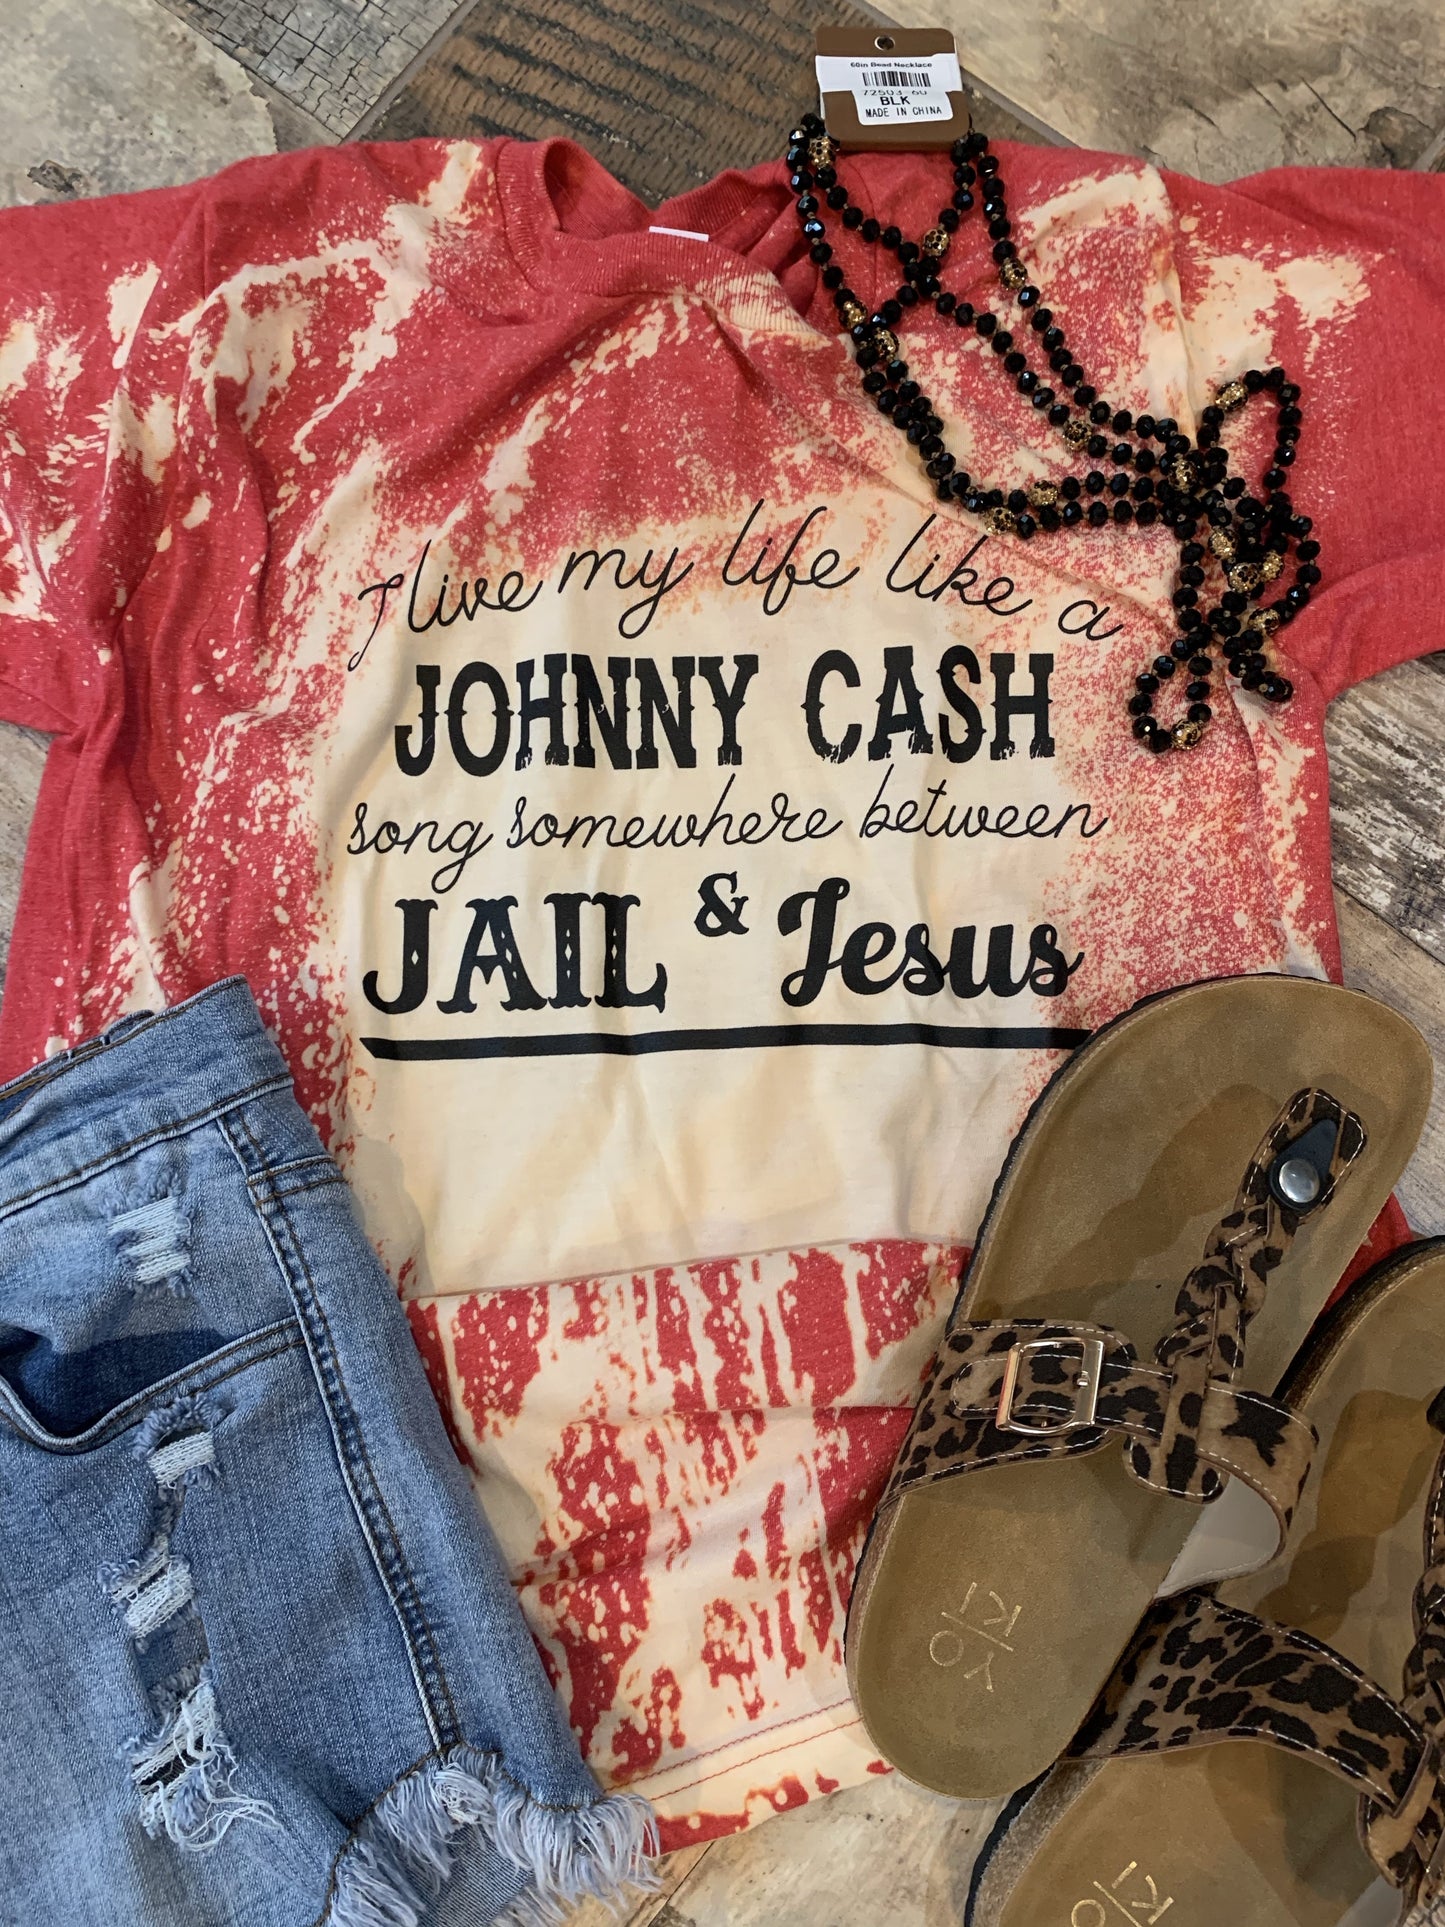 I Live My Life Like A Johnny Cash Song Somewhere Between Jail & Jesus